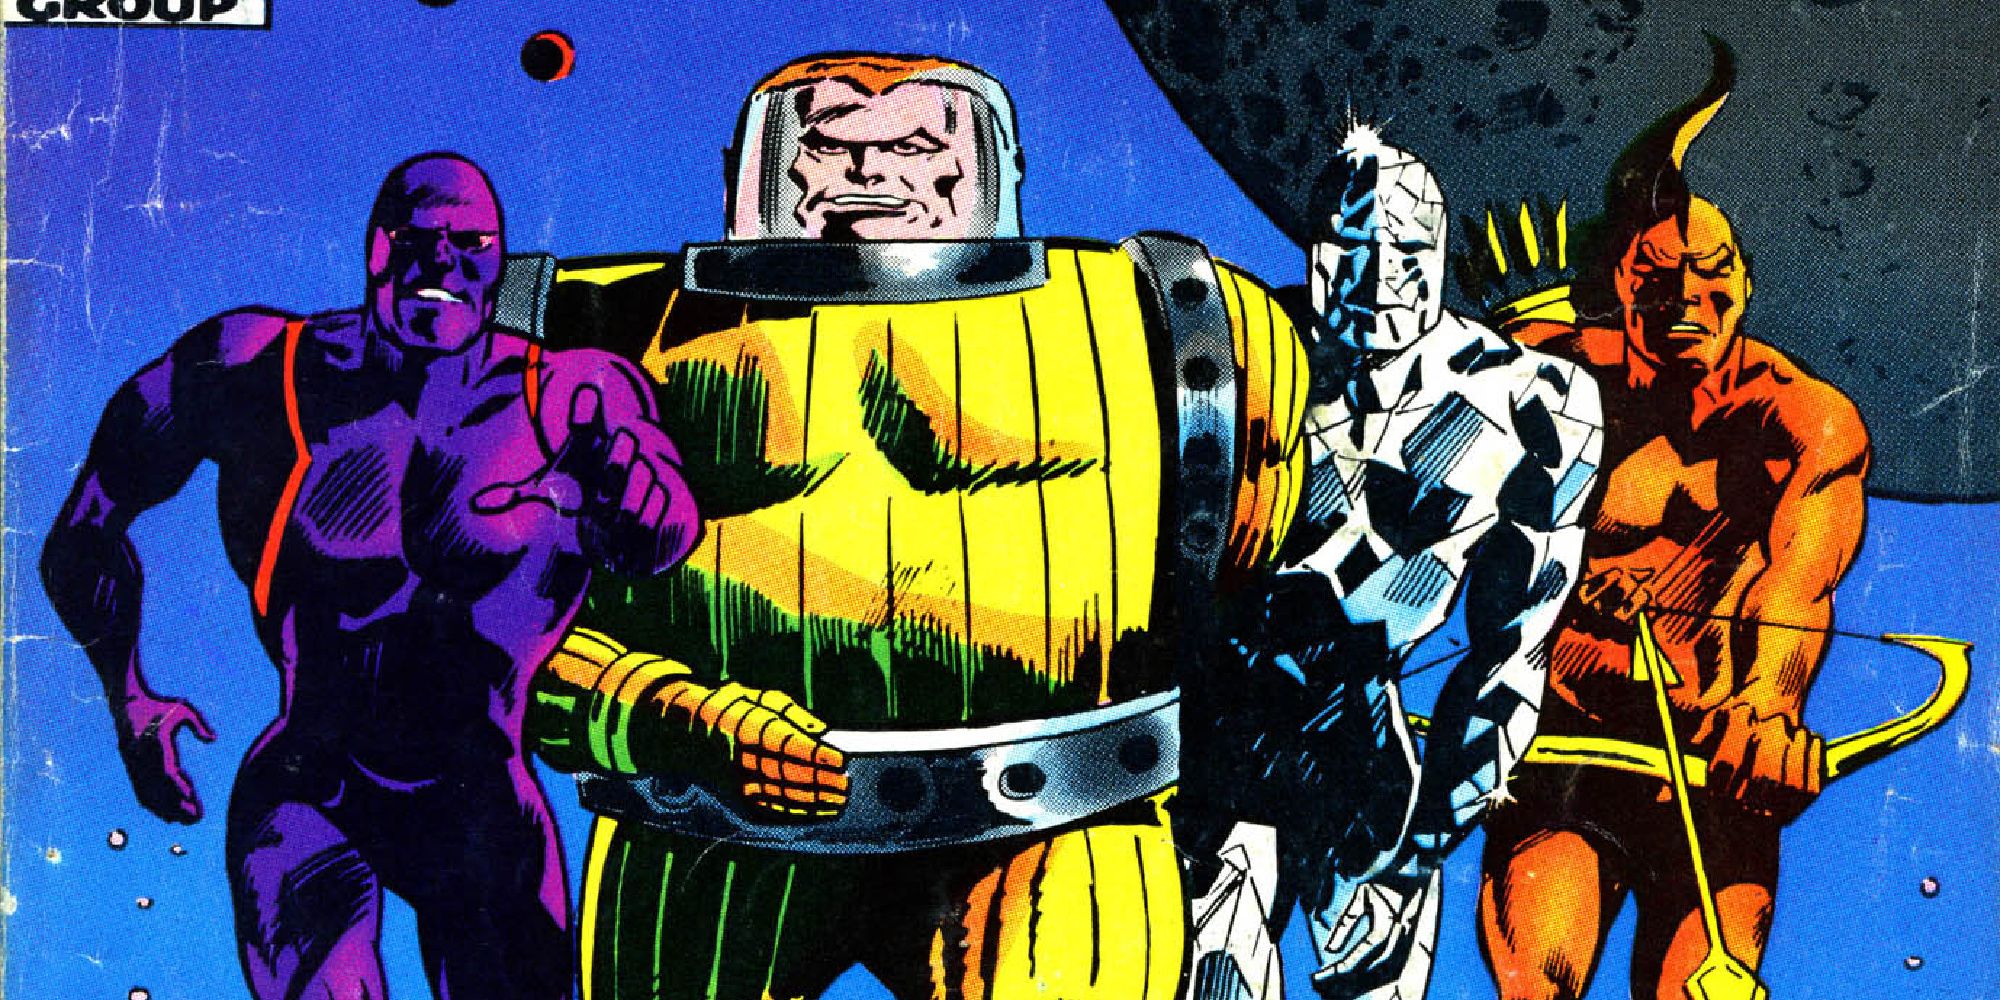 The original Guardians of the Galaxy debut in Marvel Comics.